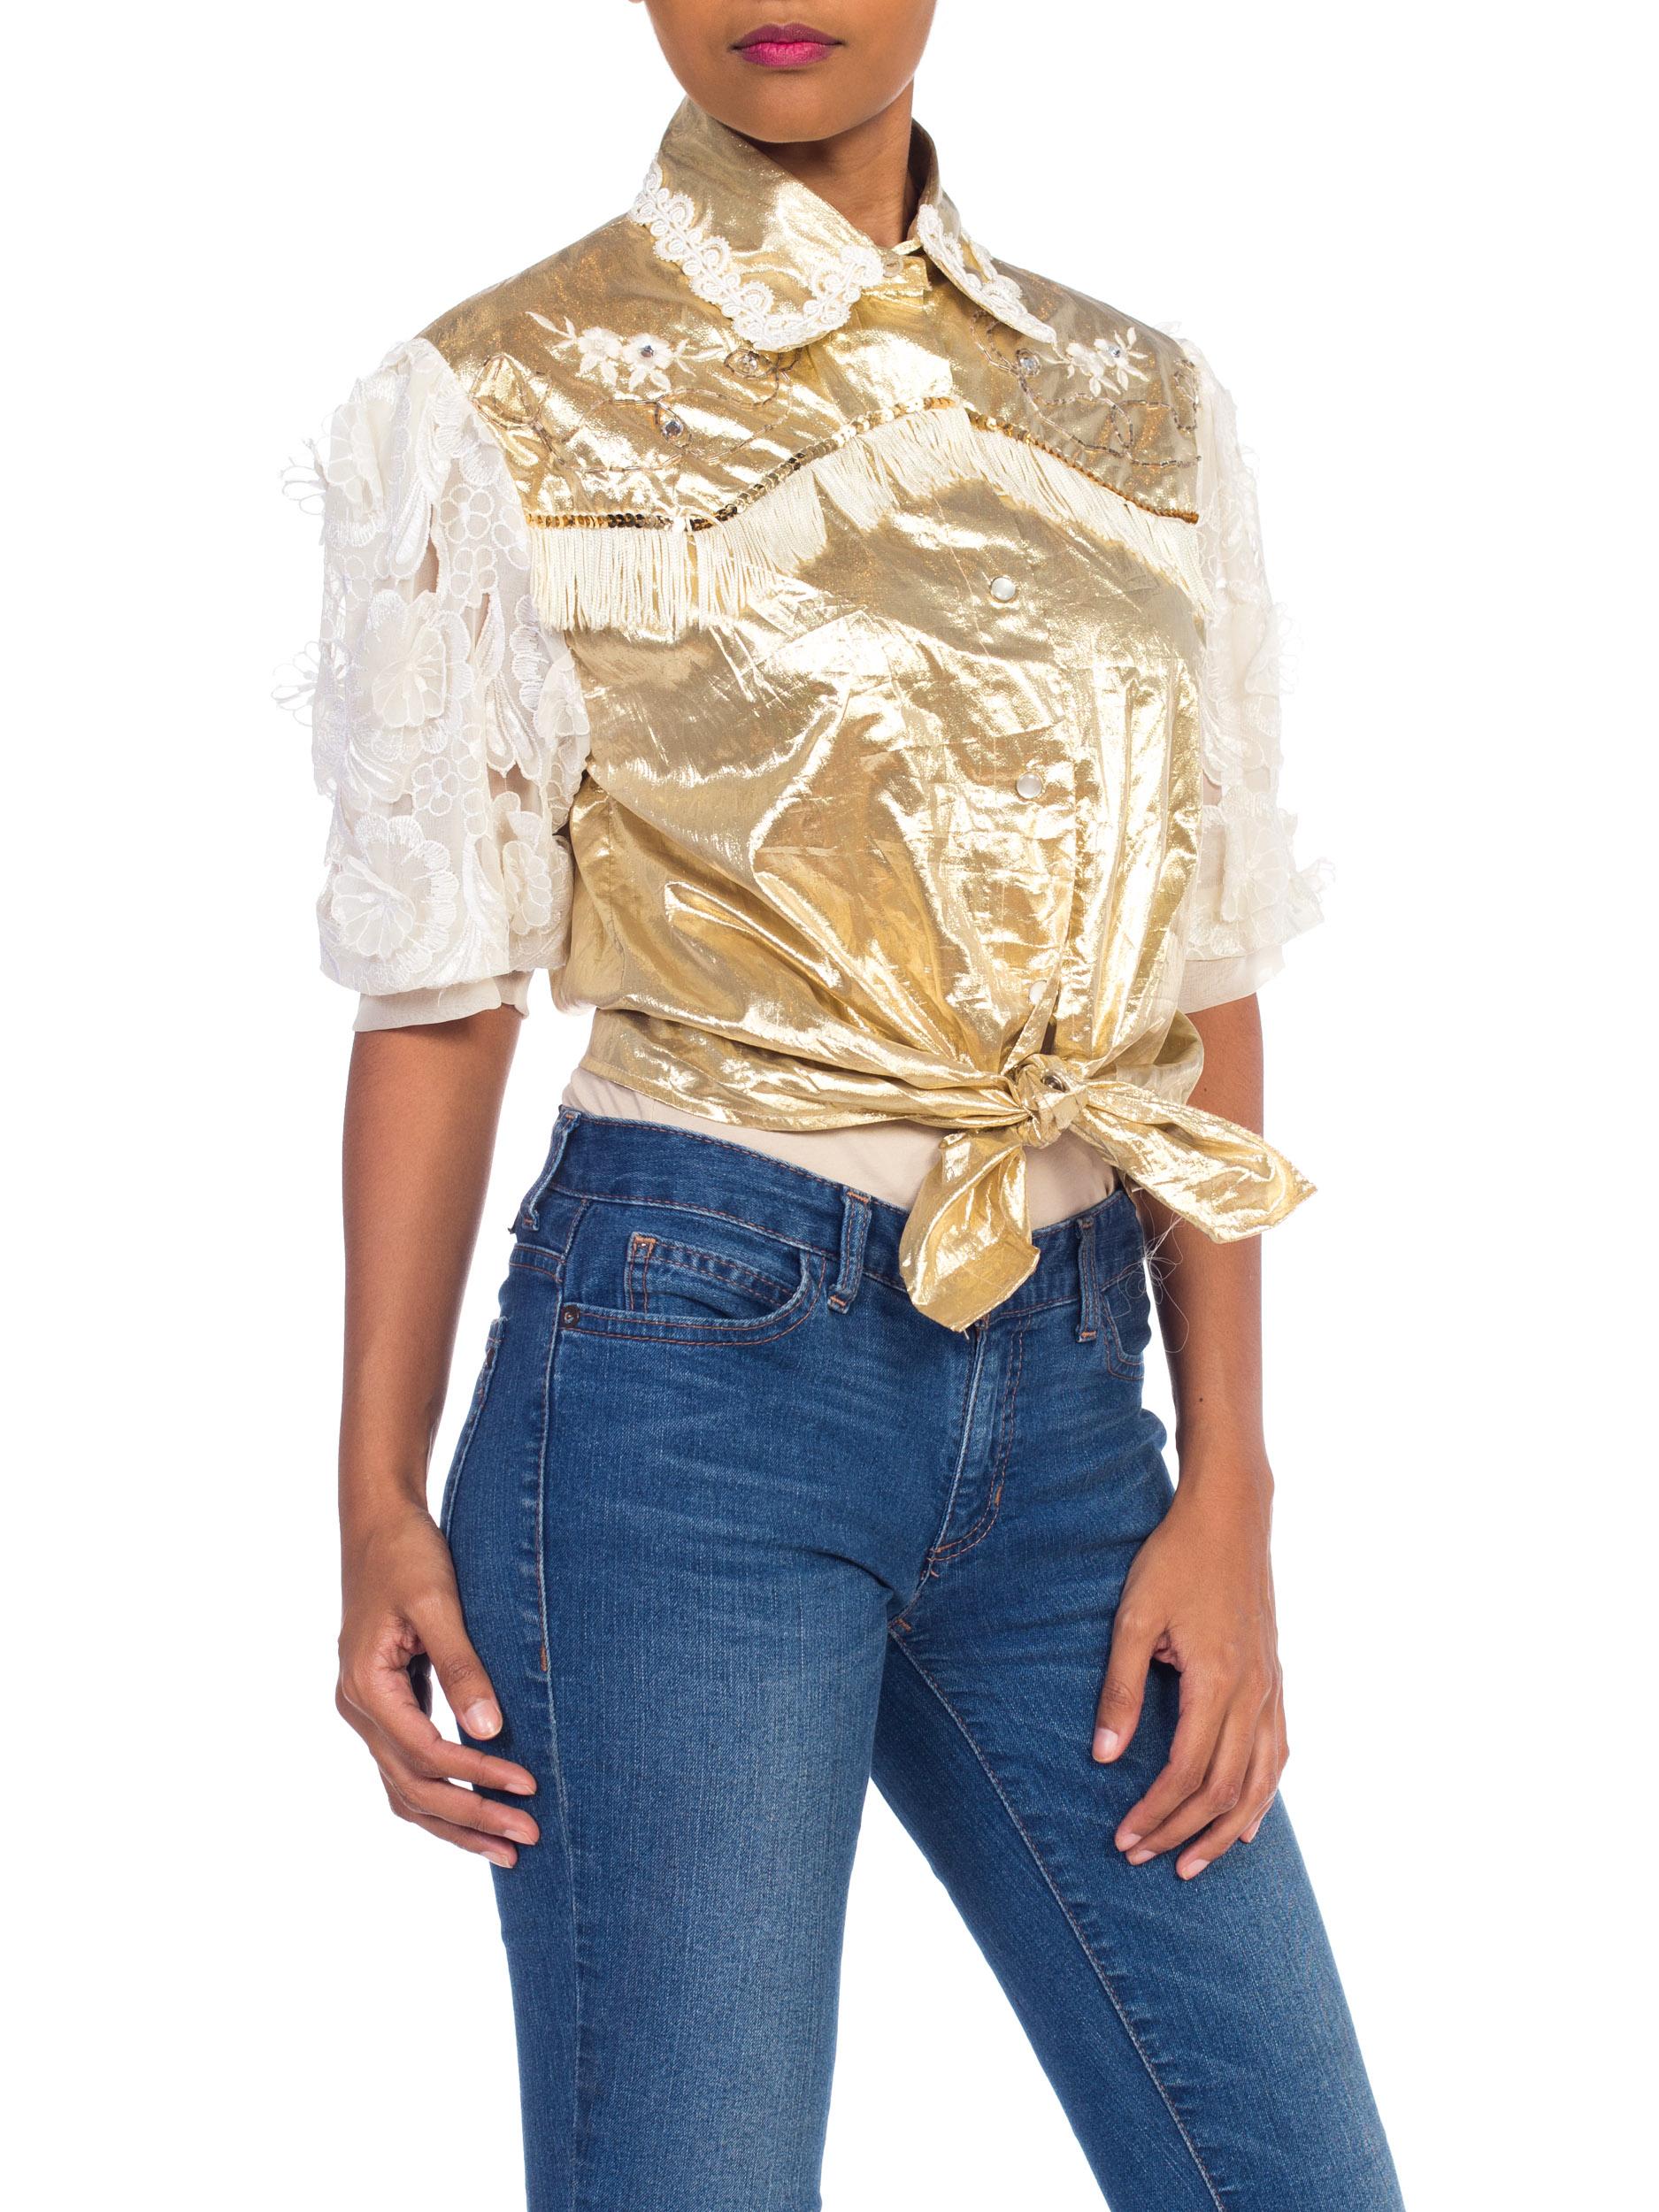 We made this from a vintage 1980s metallic gold lamé western shirt and jazzed it up a ton with fitting it and changing the sleeves with an awesome mod lace from the 1960s. A true one of a kind piece. 